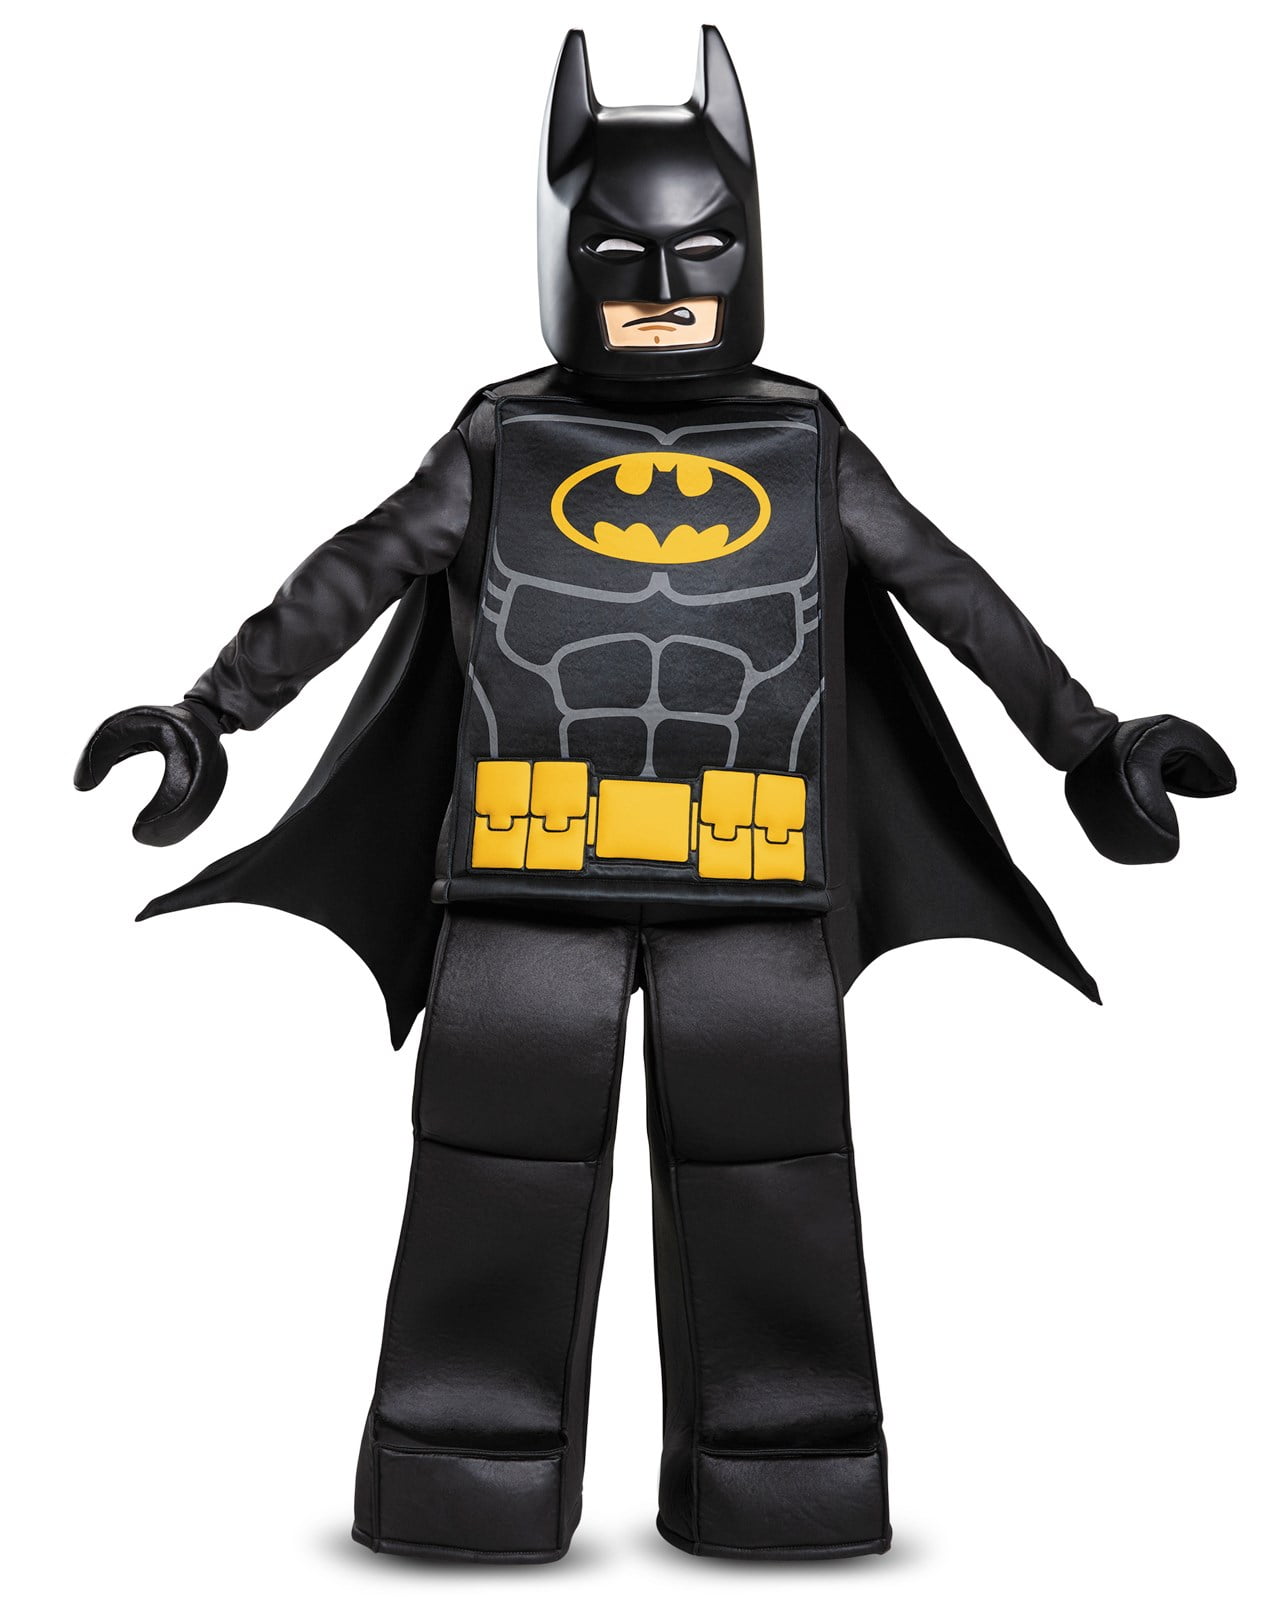 CAPE ONLY Robin or Catwoman Lego minifigure 2 CUSTOM Capes for Batman 